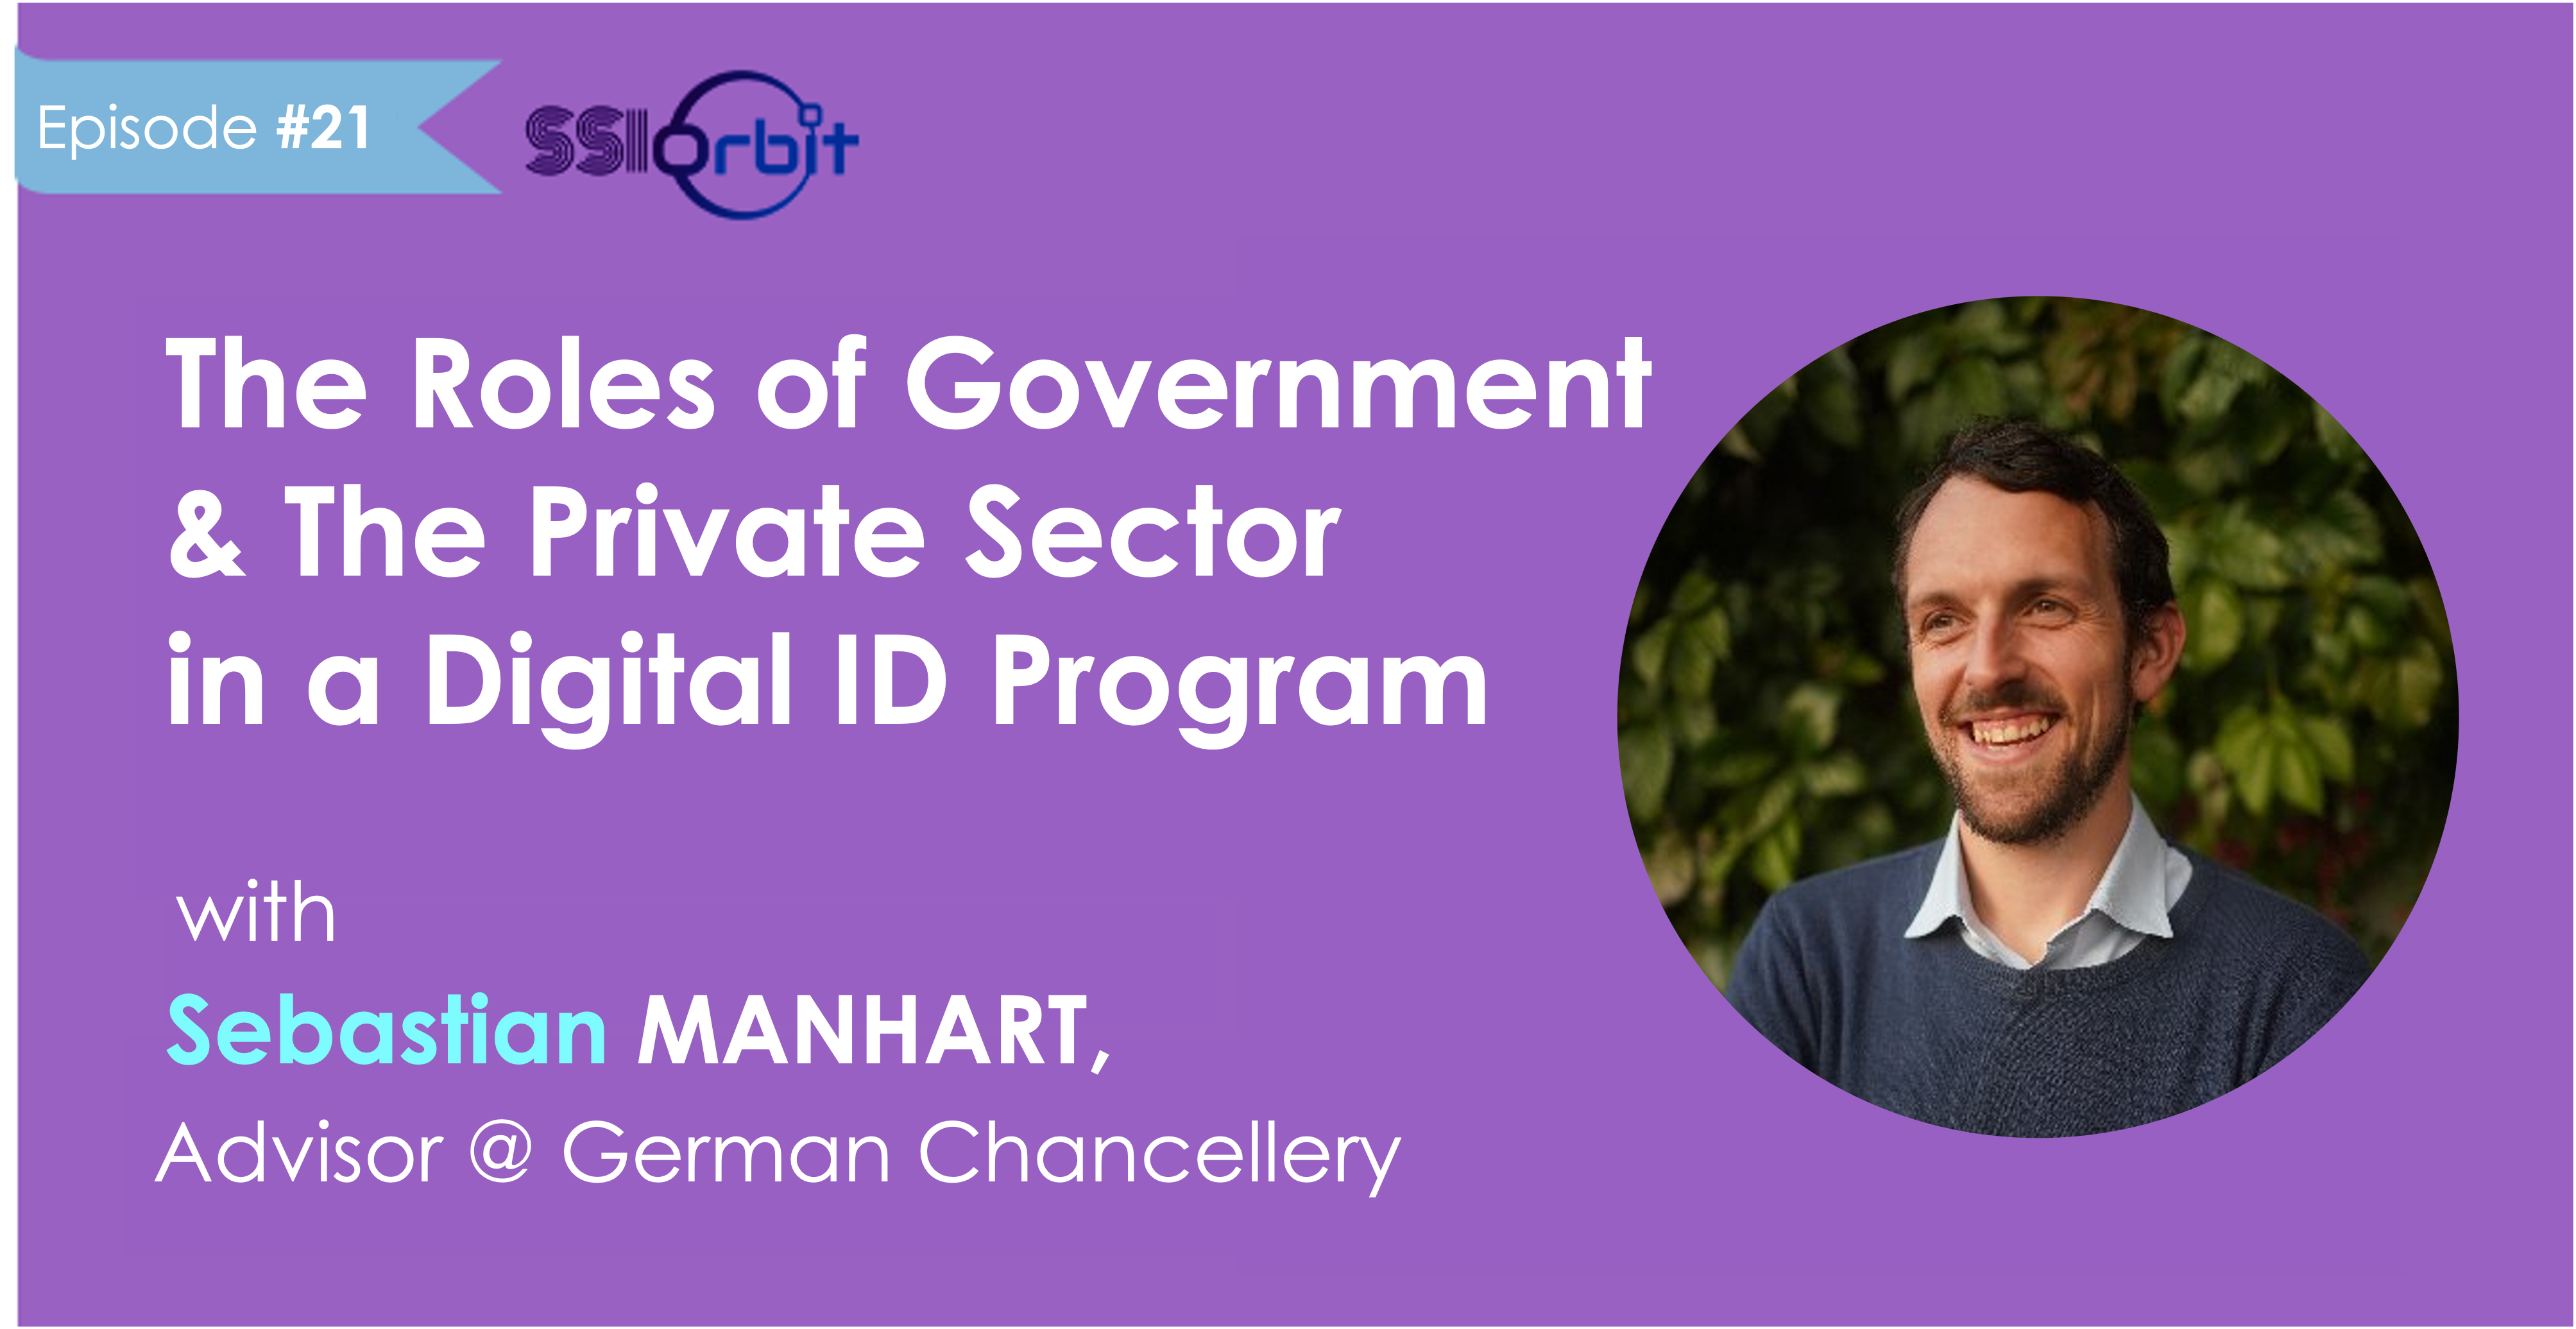 The Roles of Government & The Private Sector in a Digital ID Program with Sebastian Manhart [Podcast]